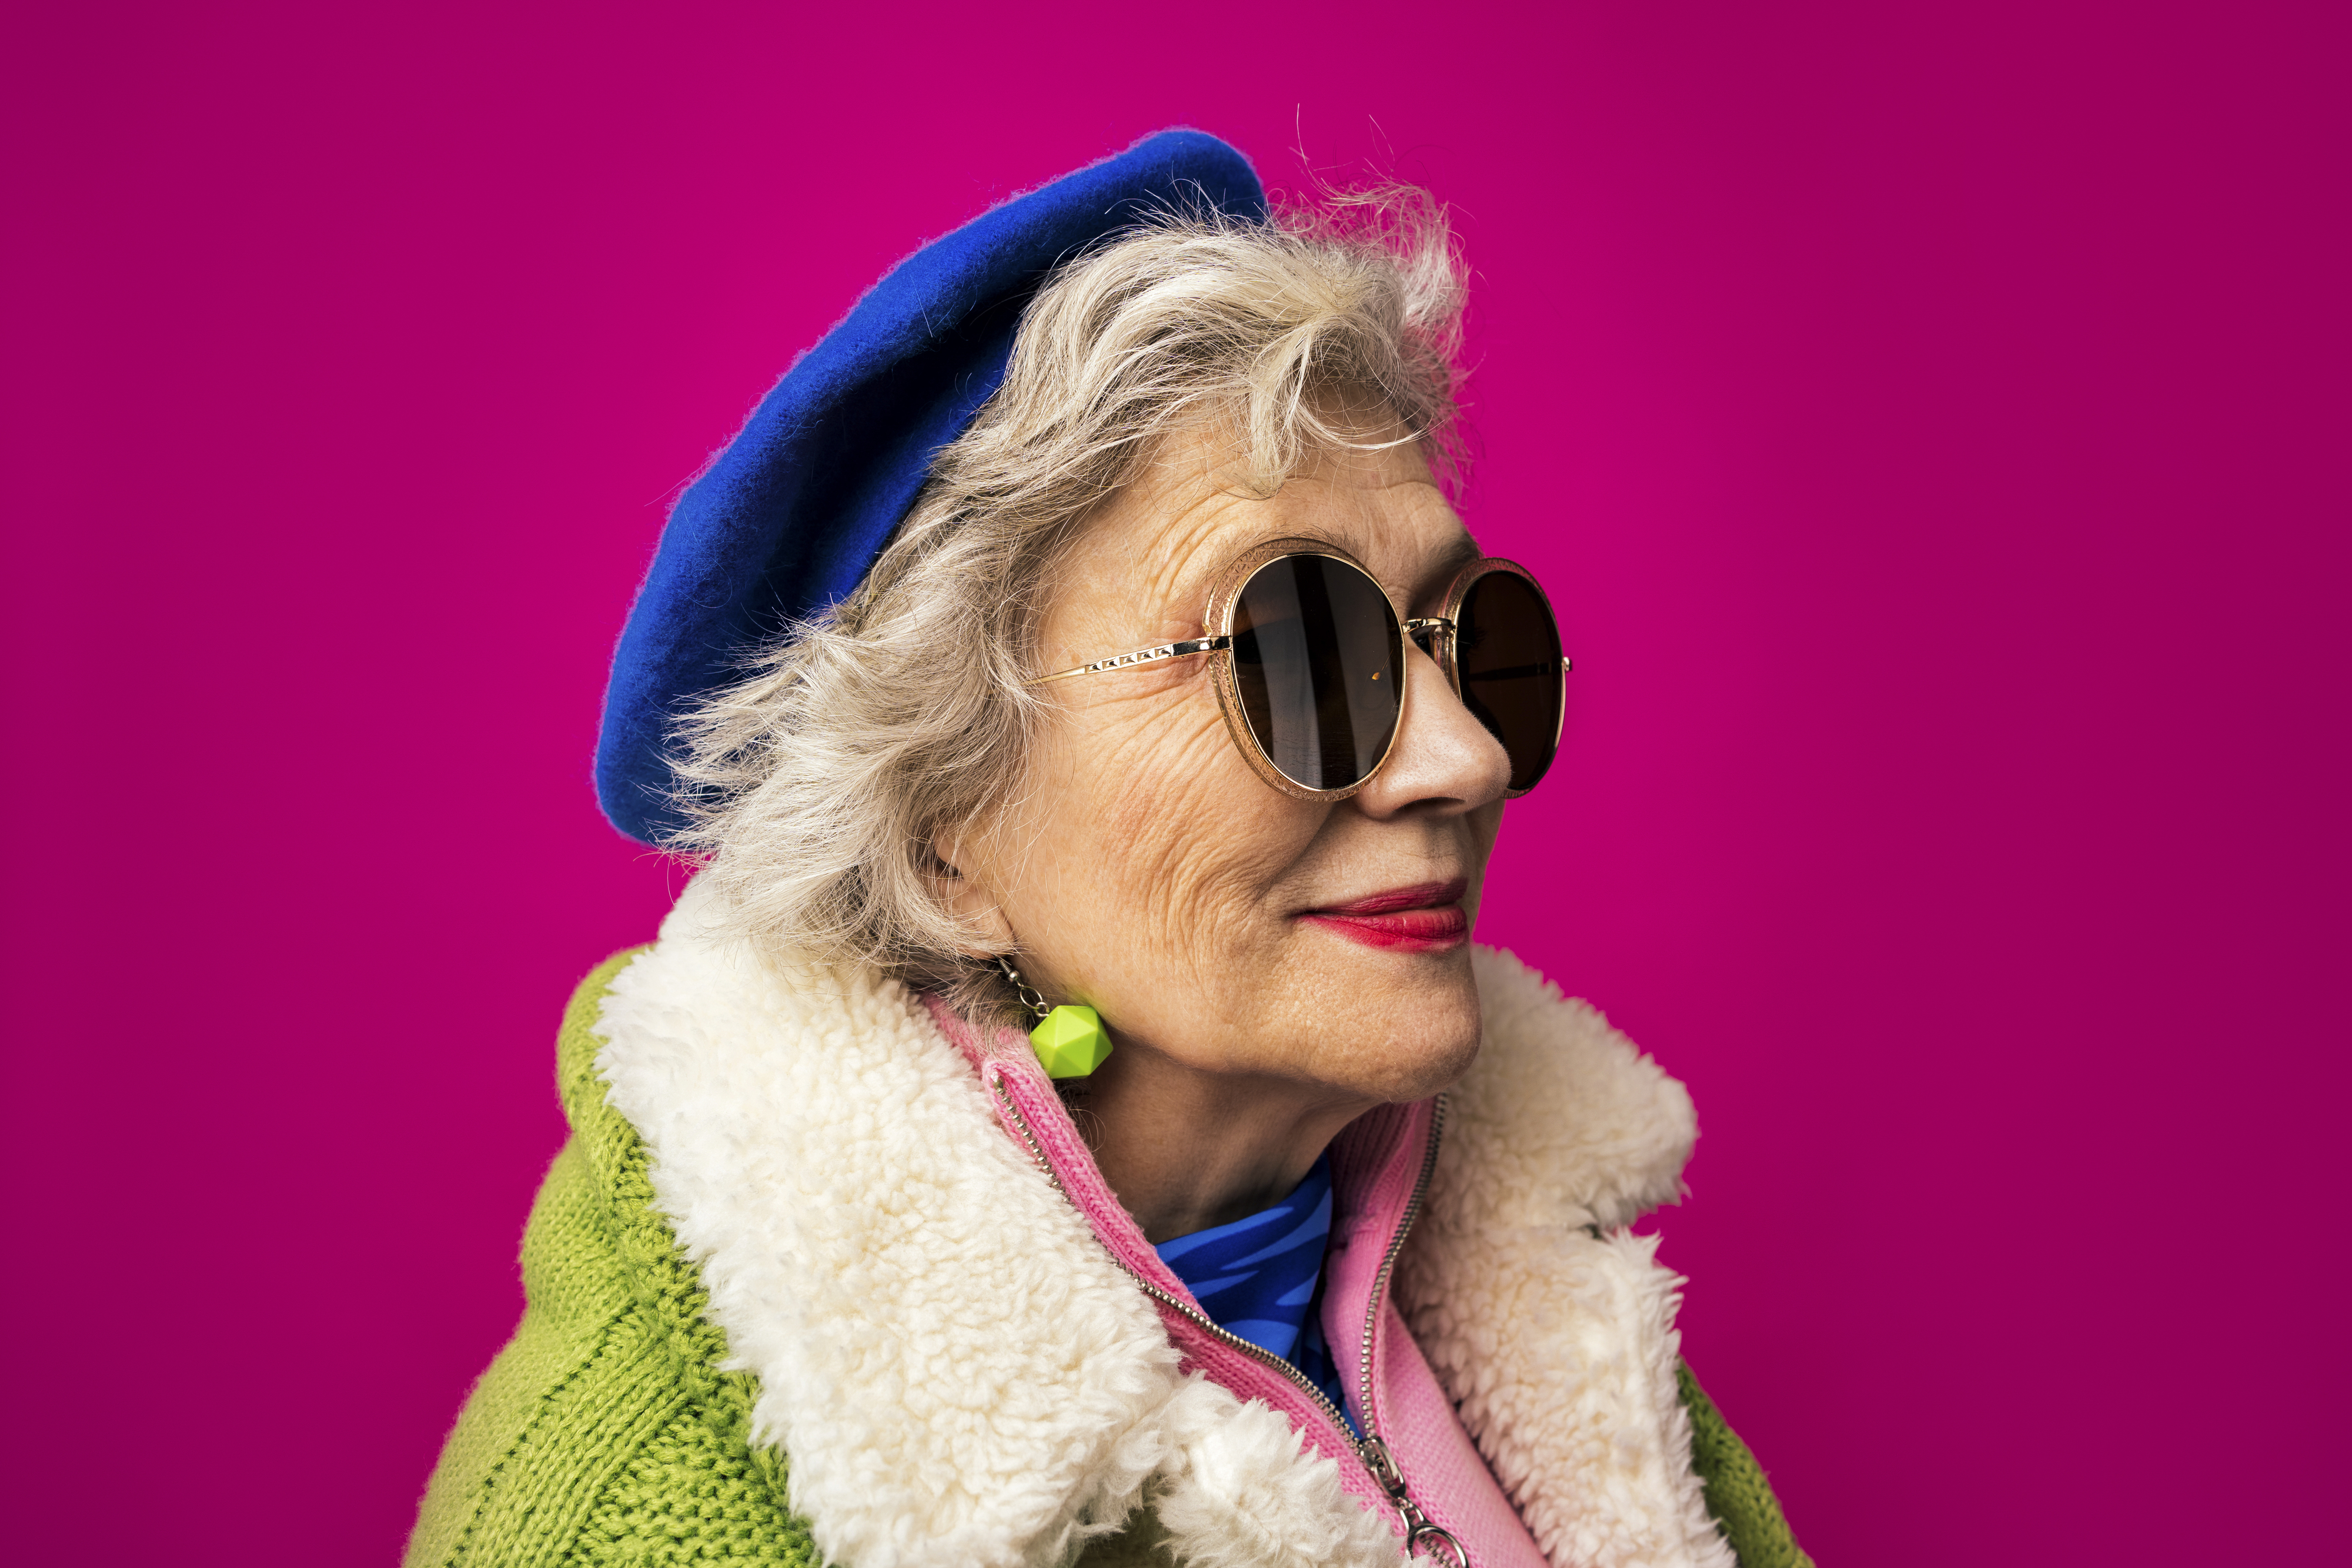 An elderly woman wearing round sunglasses, a blue beret, and a green coat with a fluffy collar stands in front of a pink background